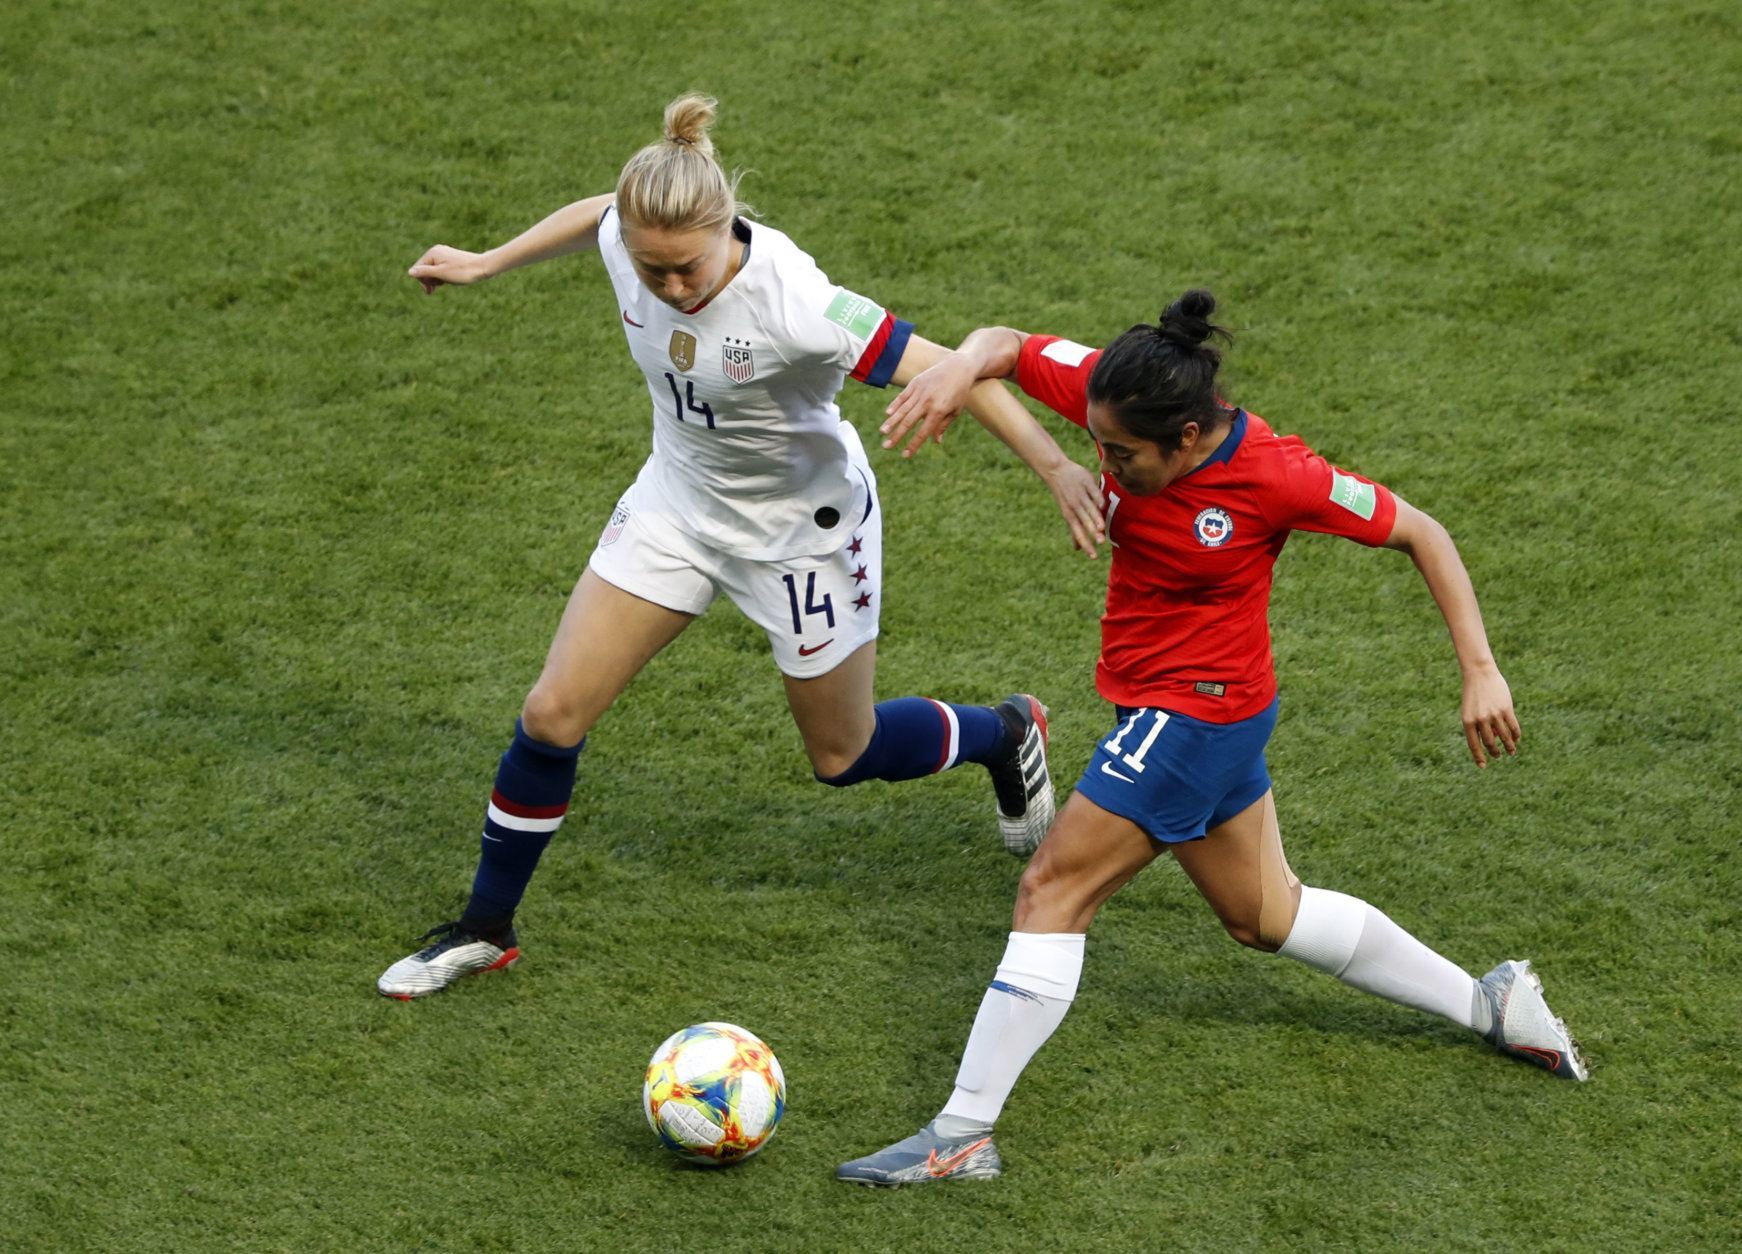 United States' Emily Sonnett vies for the ball with Chile's Yessenia Lopez, right, during the Women's World Cup Group F soccer match between the United States and Chile at the Parc des Princes in Paris, Sunday, June 16, 2019. (AP Photo/Thibault Camus)